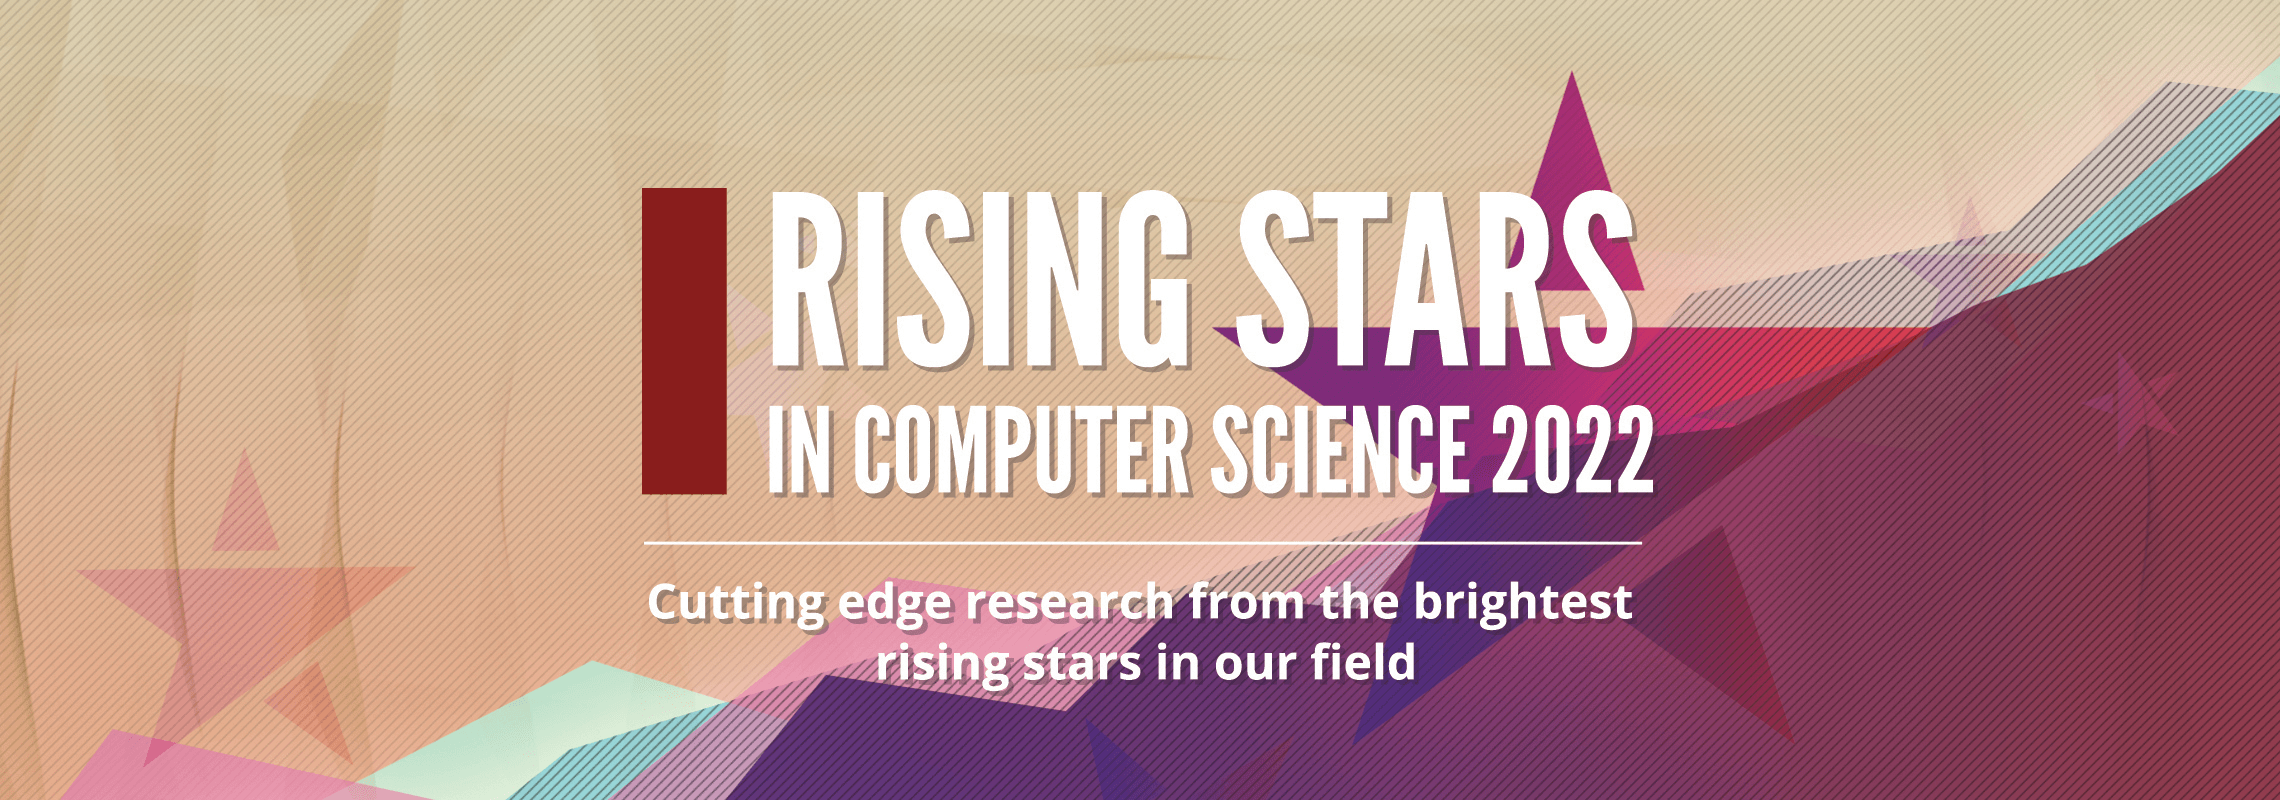 Rising Stars in Computer Science 2022: Cutting edge research from the brightest rising stars in our field